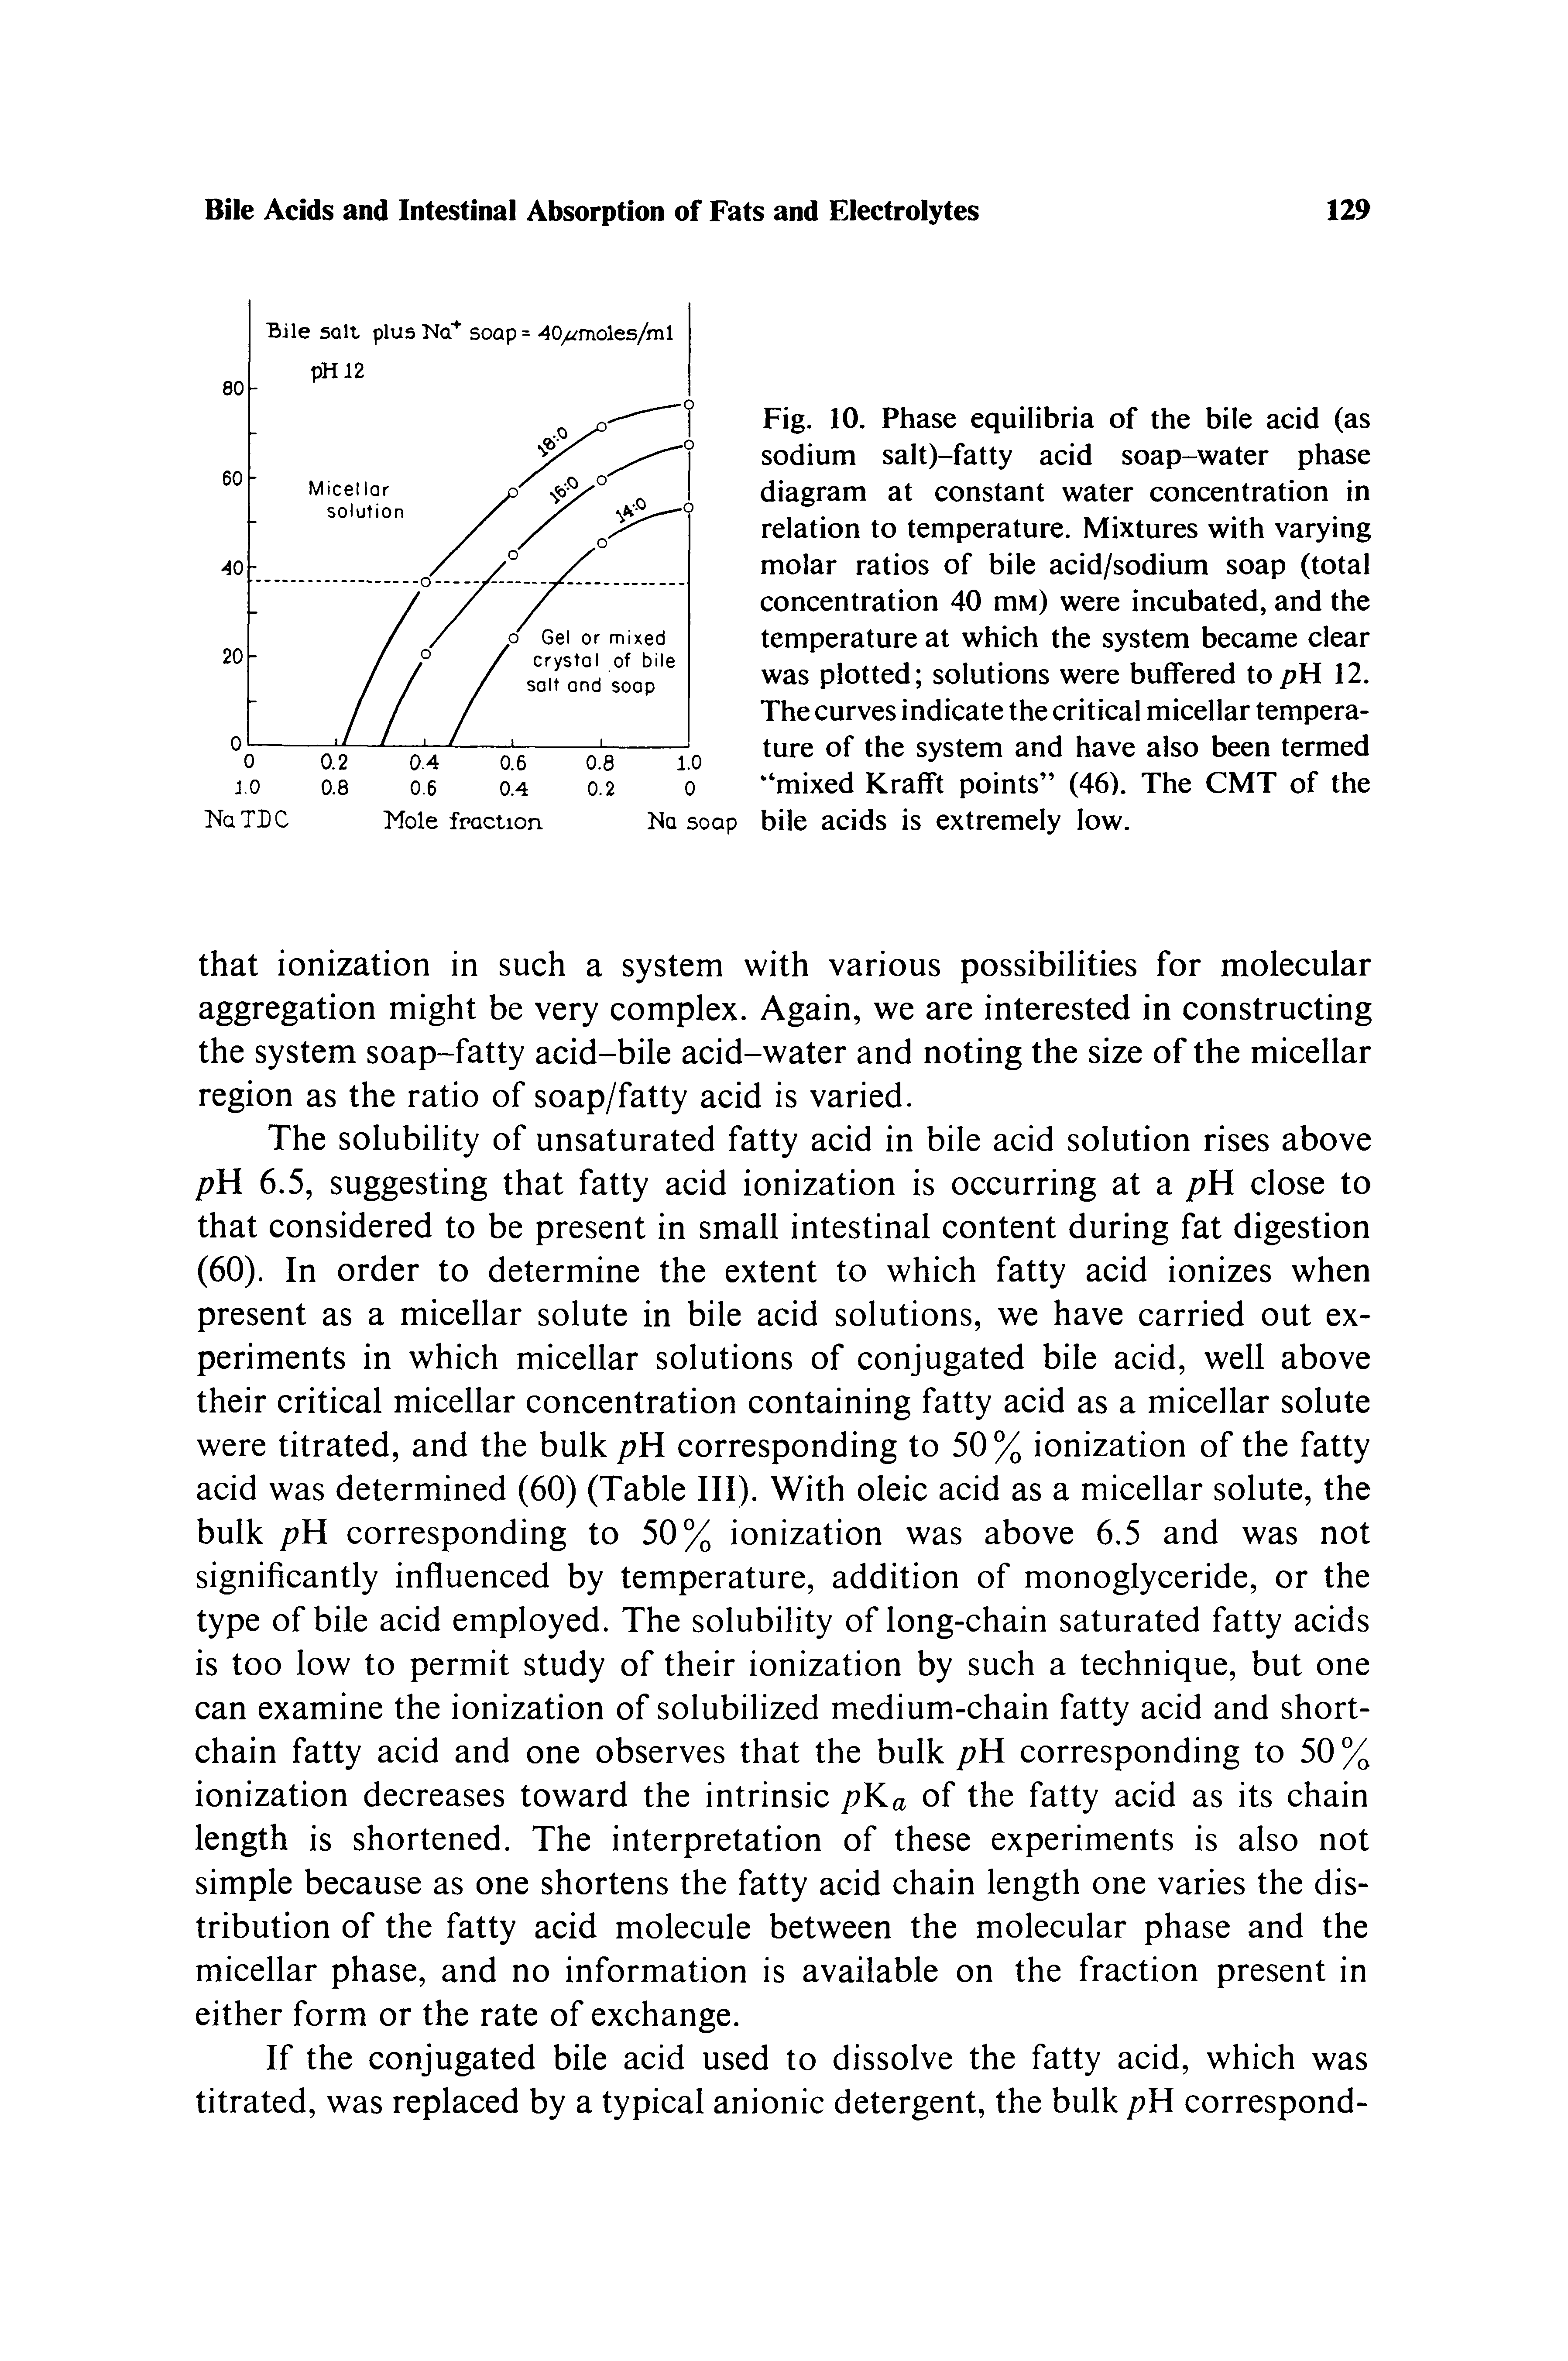 Fig. 10. Phase equilibria of the bile acid (as sodium salt)-fatty acid soap-water phase diagram at constant water concentration in relation to temperature. Mixtures with varying molar ratios of bile acid/sodium soap (total concentration 40 mM) were incubated, and the temperature at which the system became clear was plotted solutions were buffered top i 12. The curves indicate the critical micellar temperature of the system and have also been termed mixed Krafft points (46). The CMT of the bile acids is extremely low.